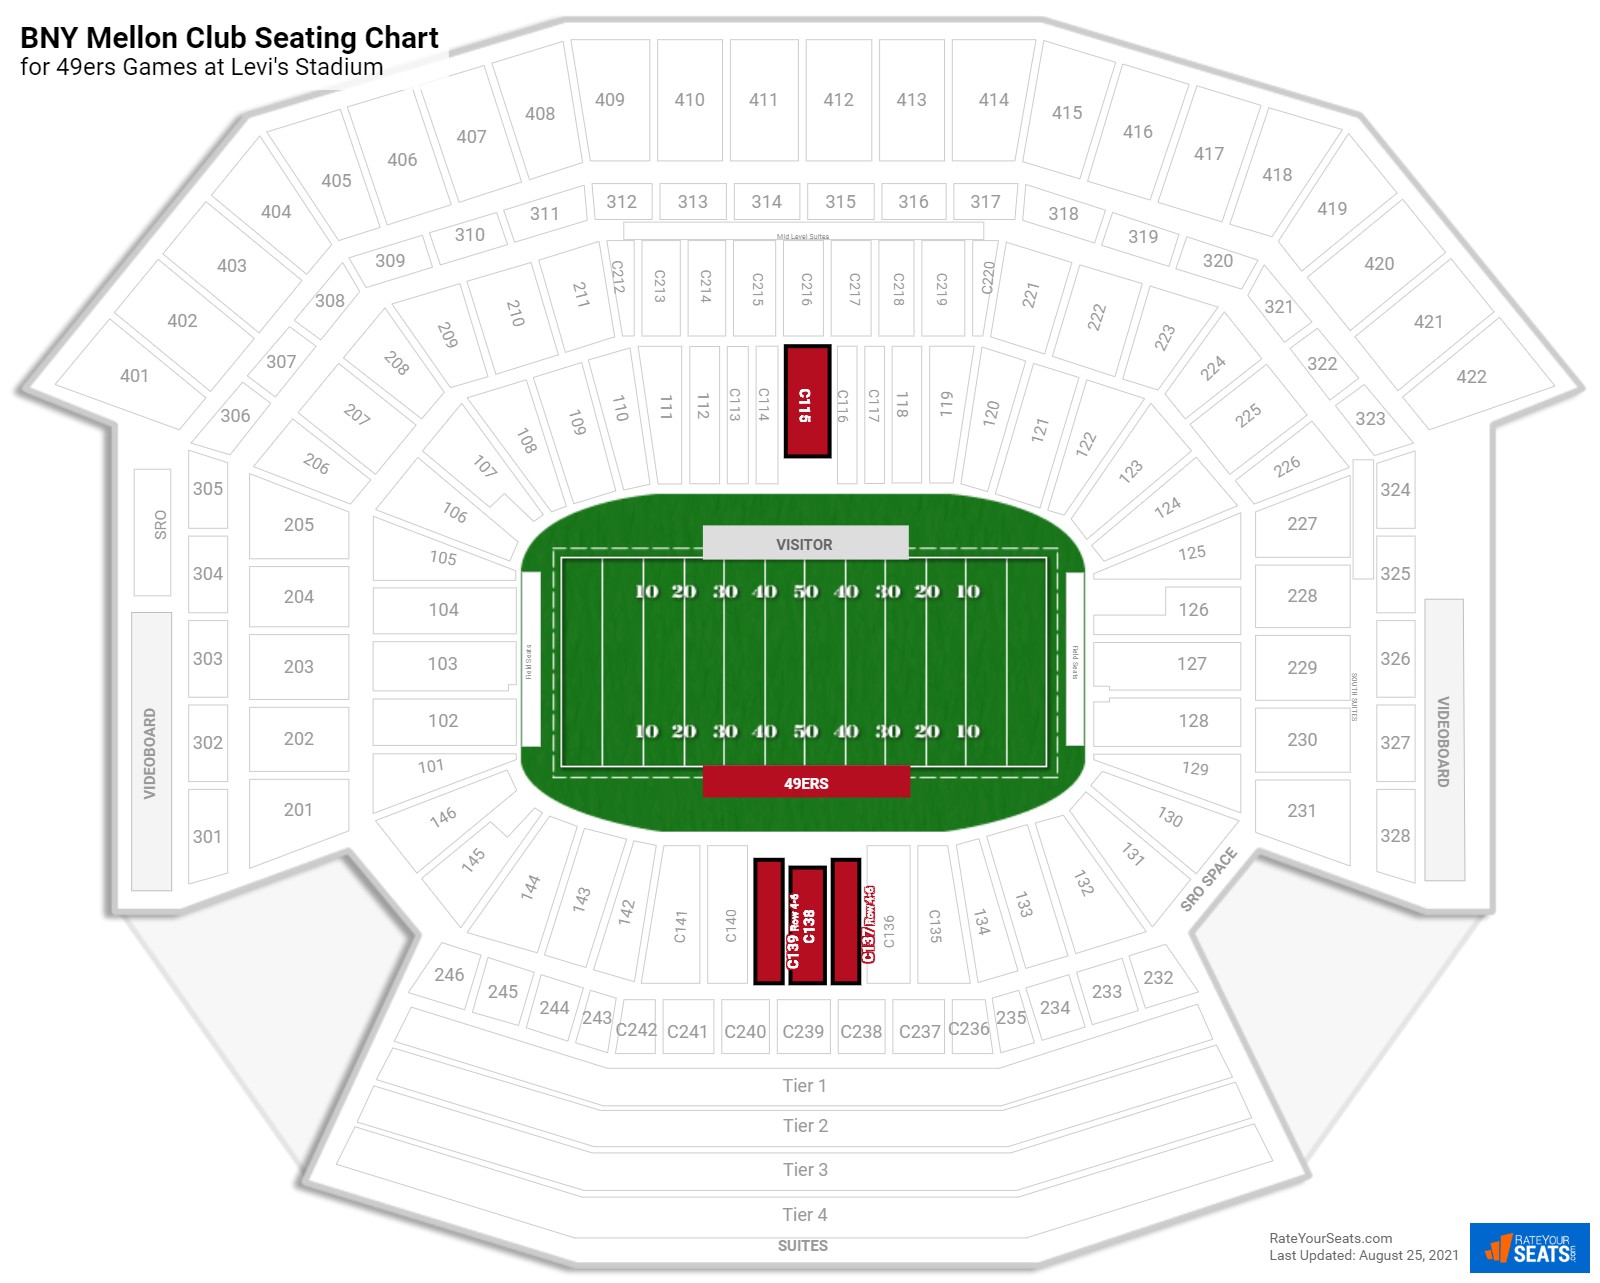 49ers BNY Mellon Club Seating Chart at Levi